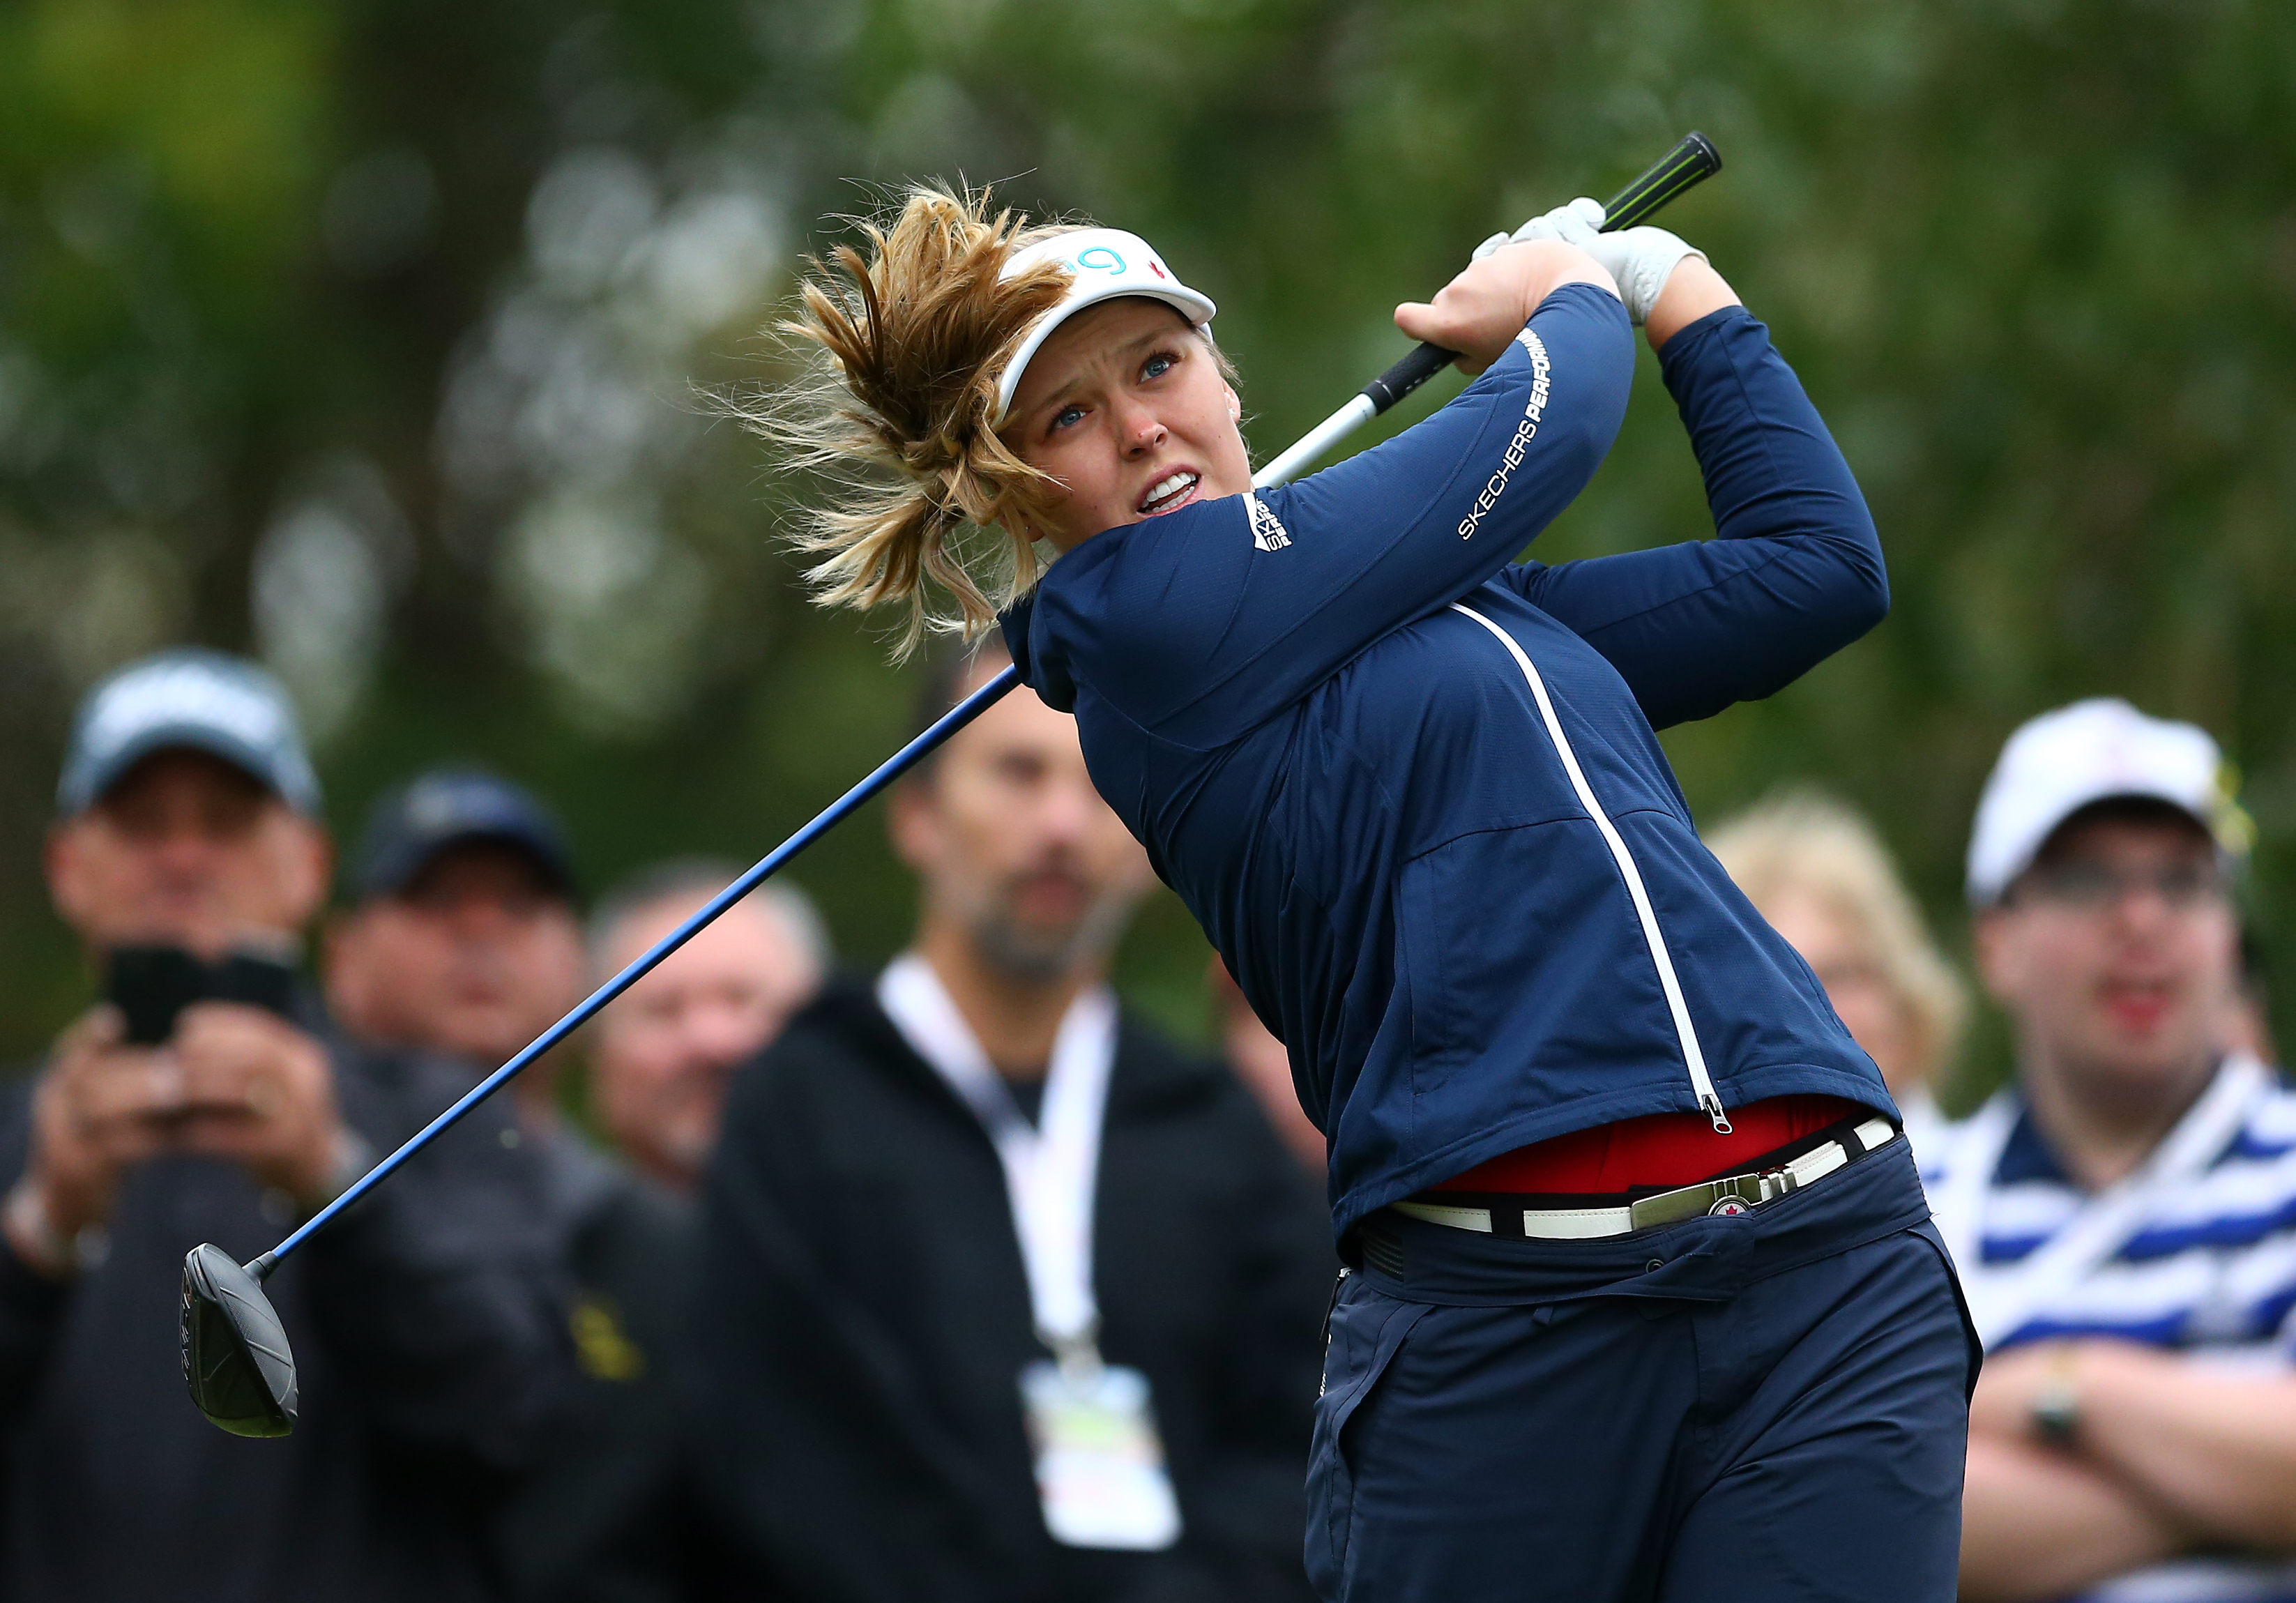 2 days ago - brooke henderson poses during a practice round prior to the st...